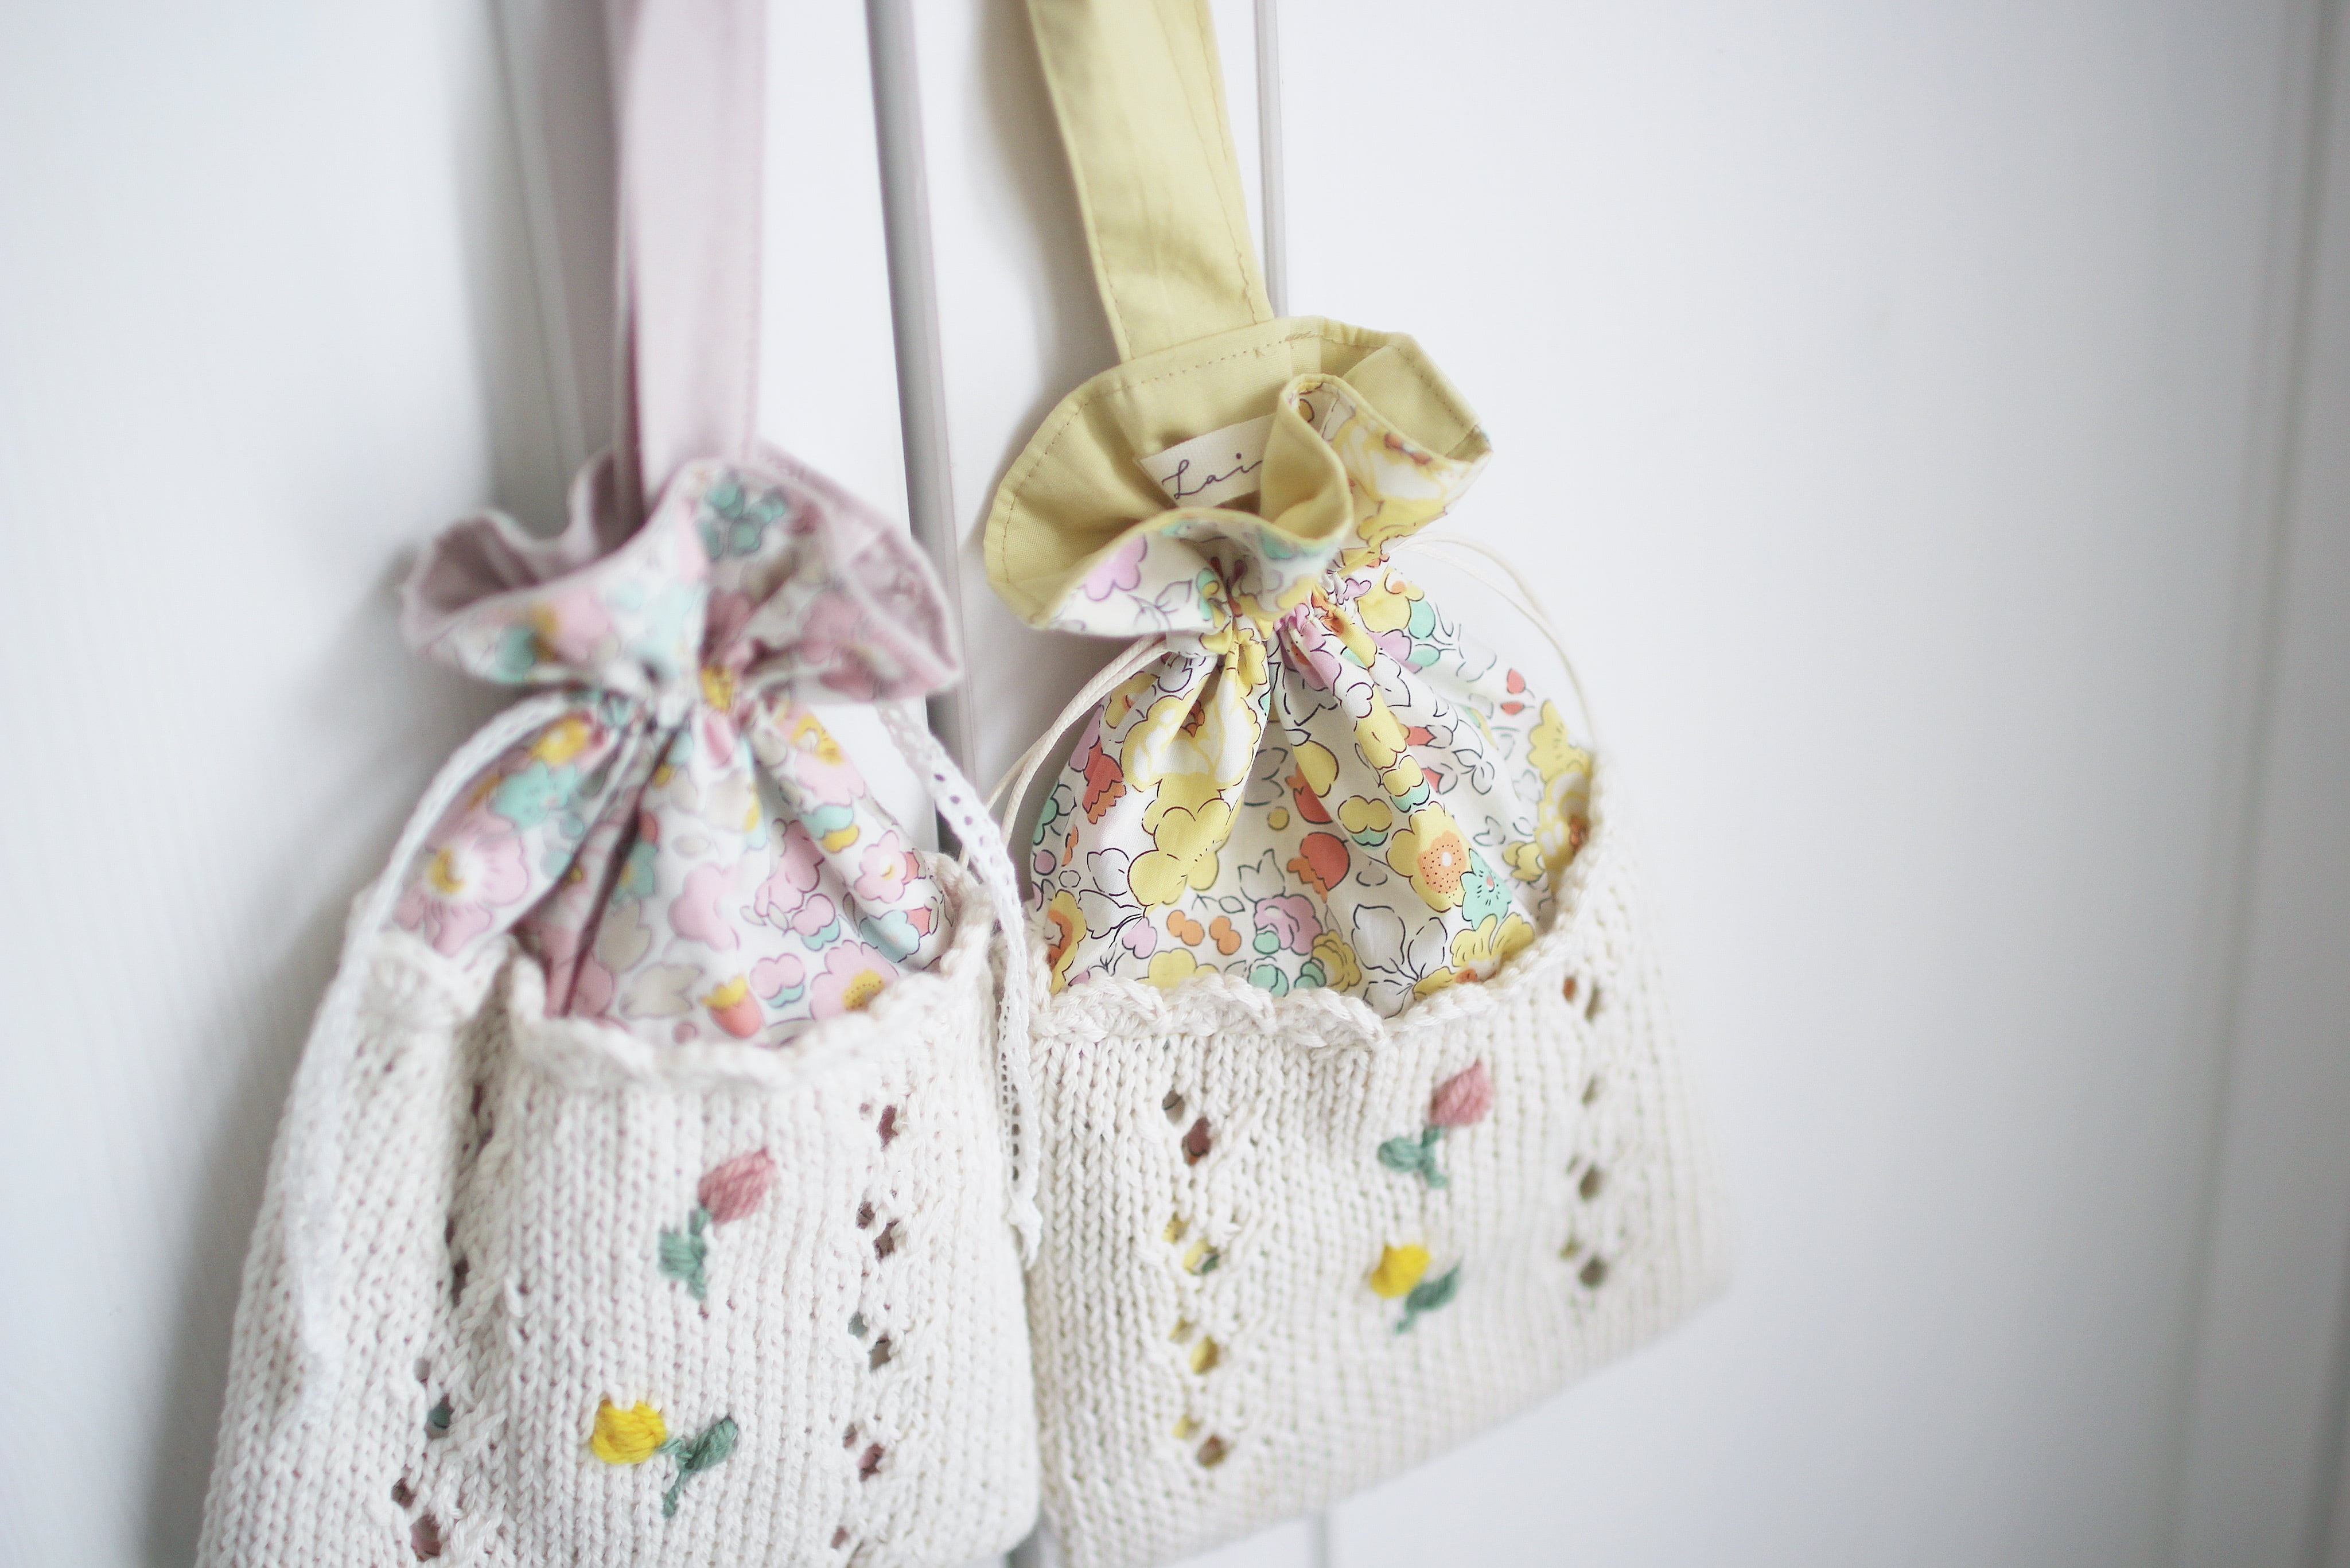 Embroidery knit bag